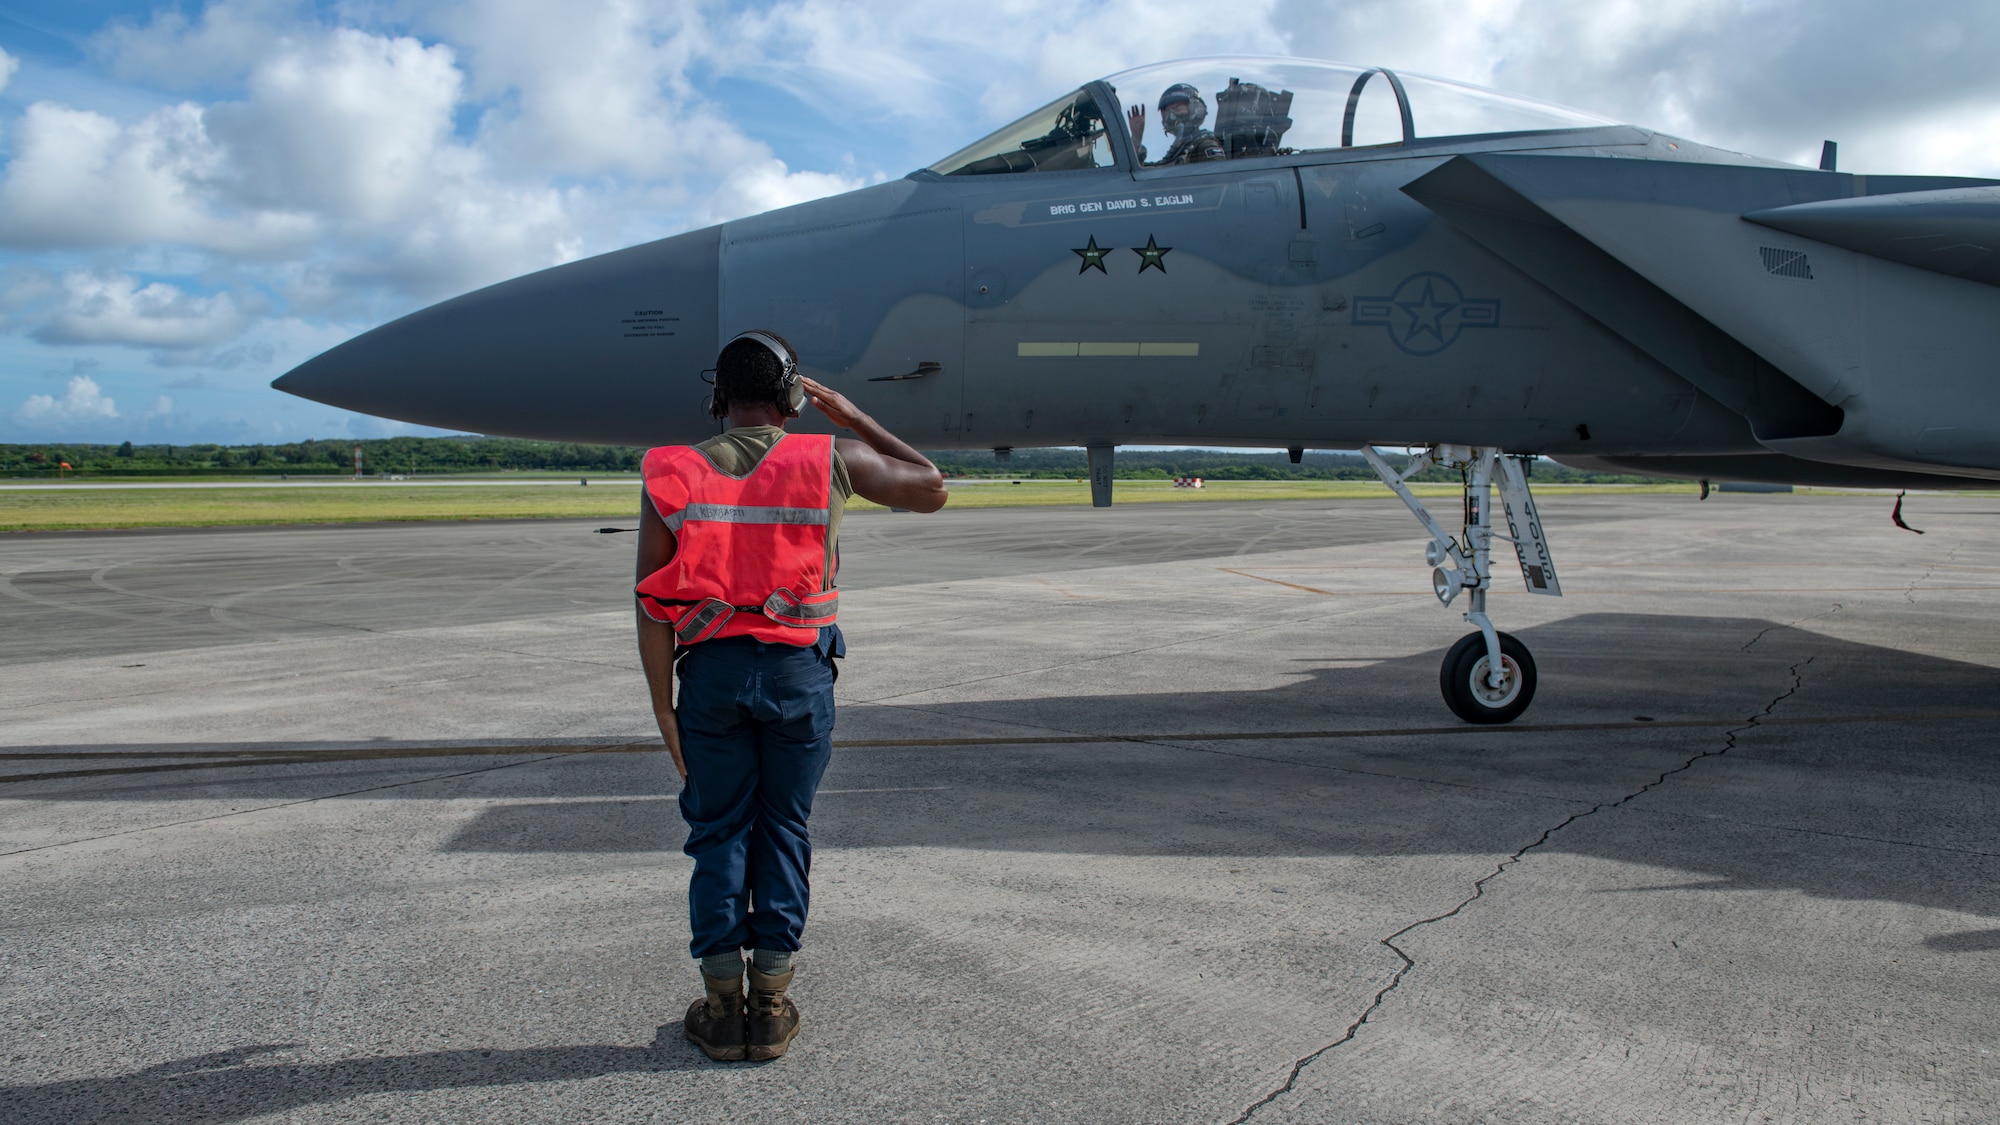 A crew chief assigned to the 44th Aircraft Maintenance Unit salutes the pilot as he departs the service apron during surge operations at Kadena Air Base, Japan, Aug. 24, 2022. Surge operations are a vital component to the development of aircrew and support personnel, allowing them to build and further improve the skills needed to remain a ready and capable force. (U.S. Air Force photo by Senior Airman Jessi Roth)